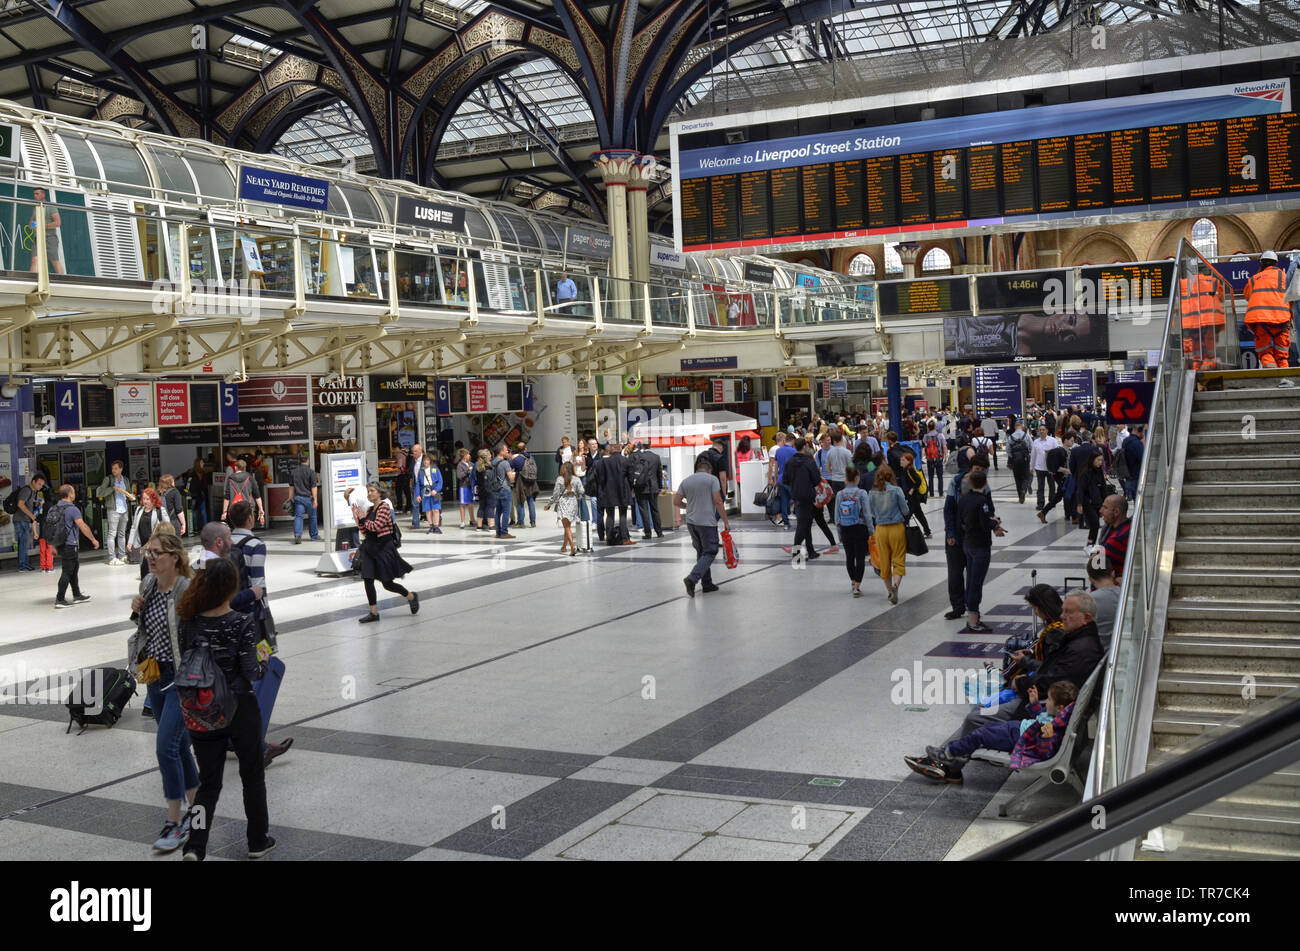 Liverpool street station, London United Kingdom, 14 June 2018. The main hall of the station, buzzing with people, the informative luminous display boa Stock Photo